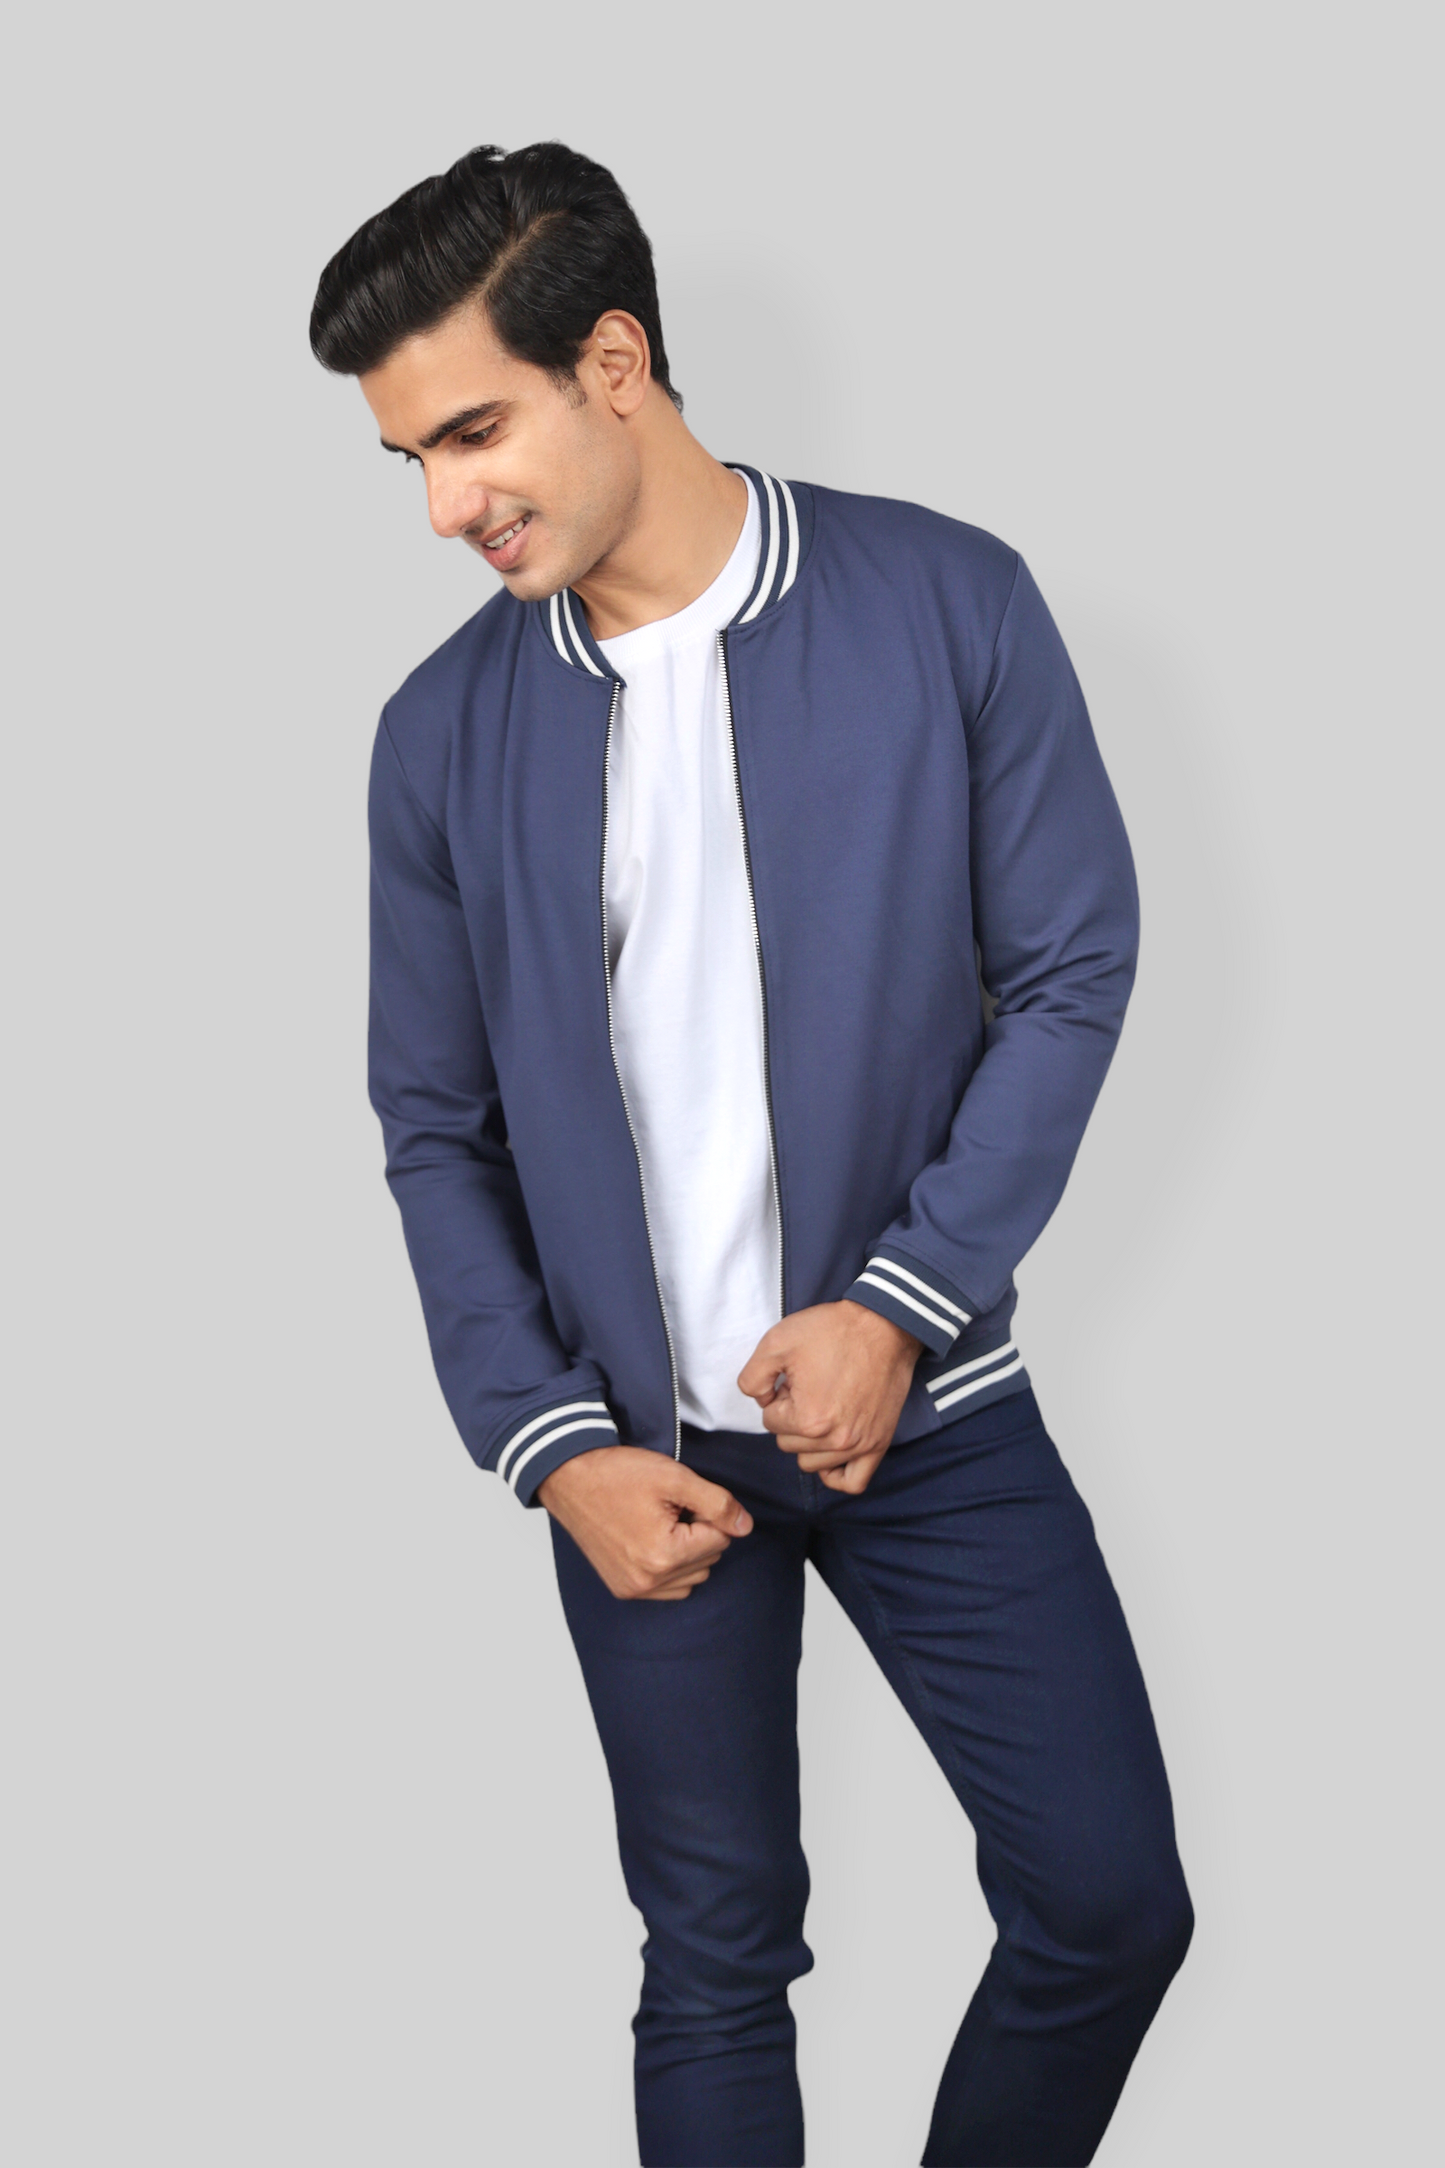 Classic Airforce Blue Bomber jacket for men